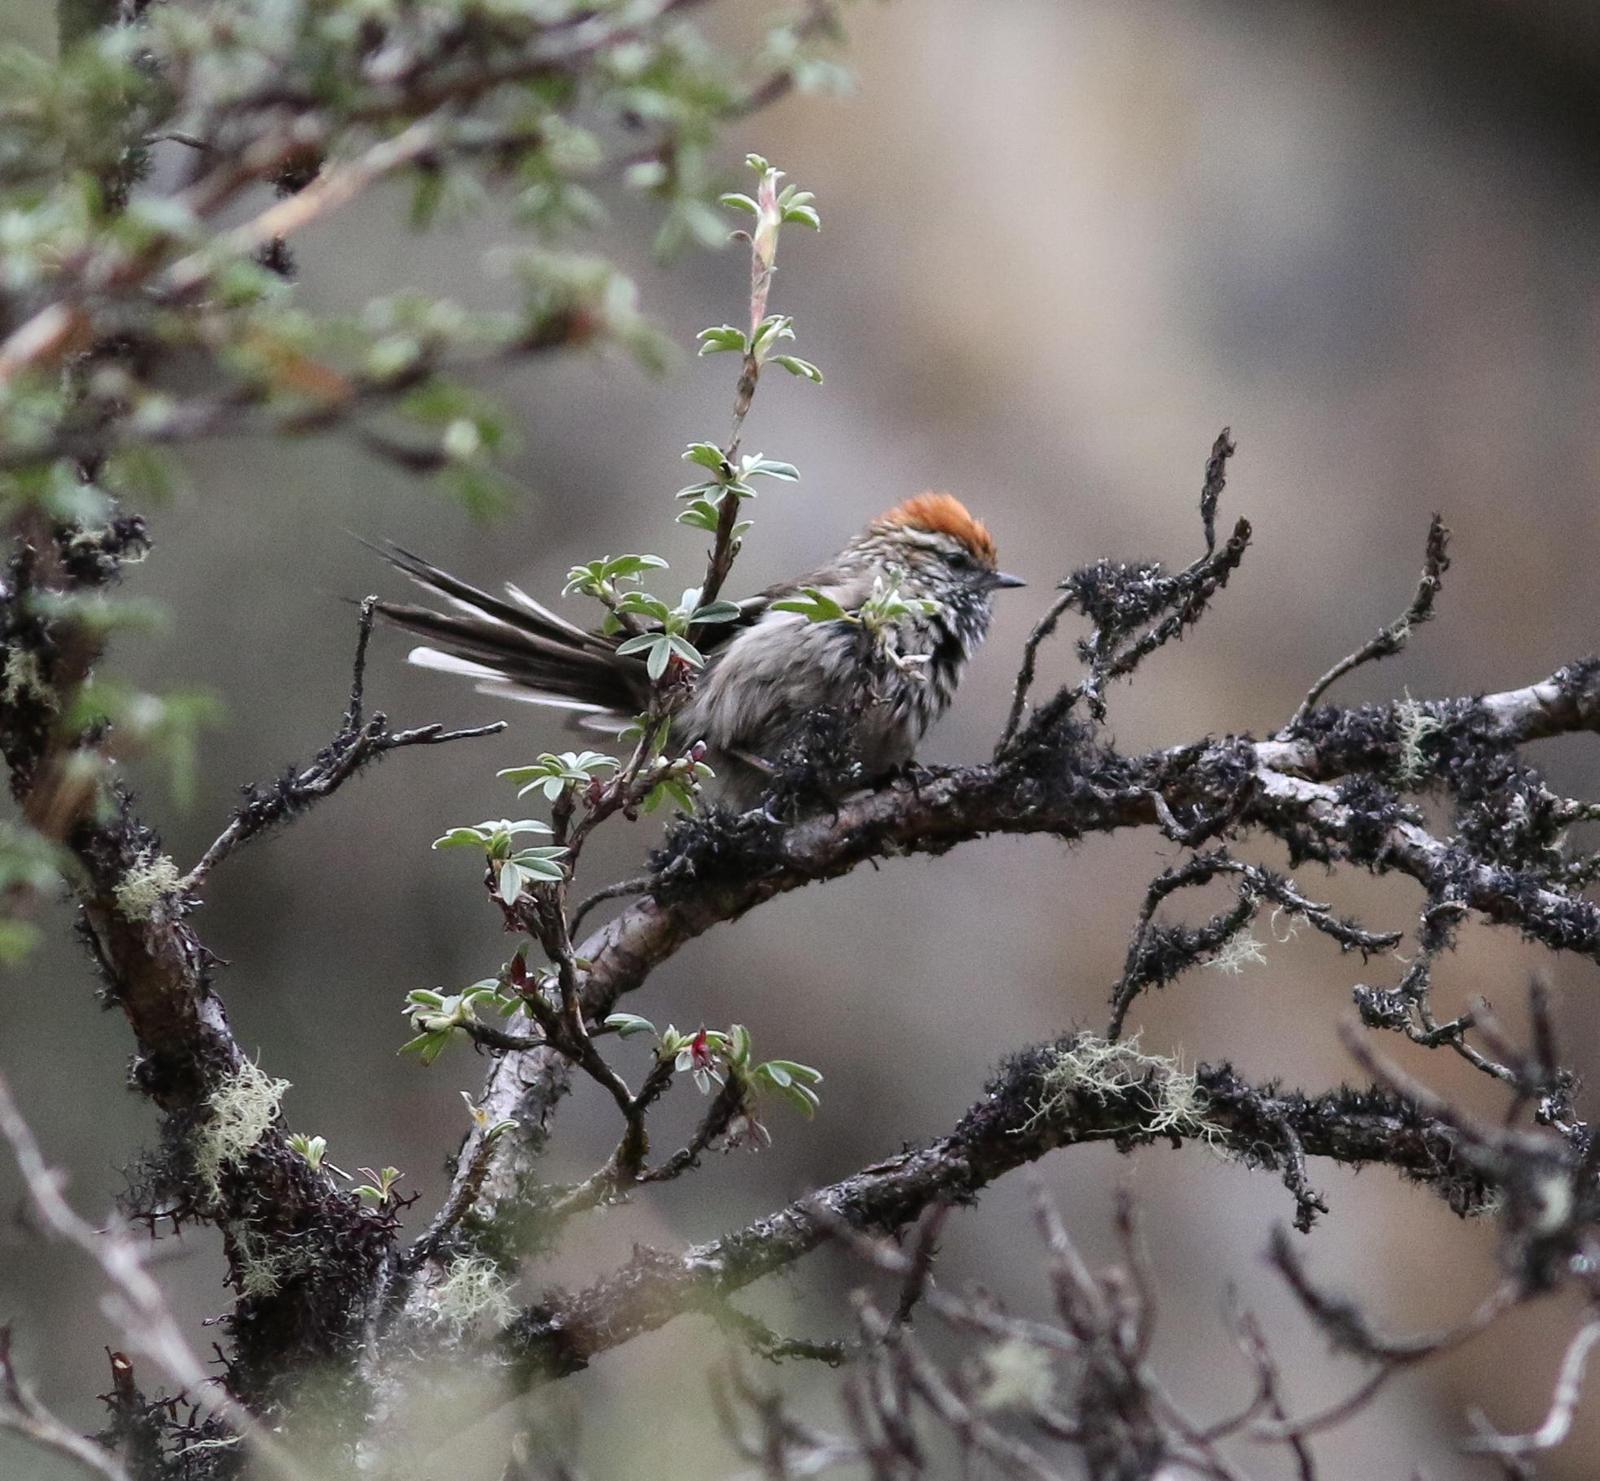 White-browed Tit-Spinetail Photo by Leonardo Garrigues